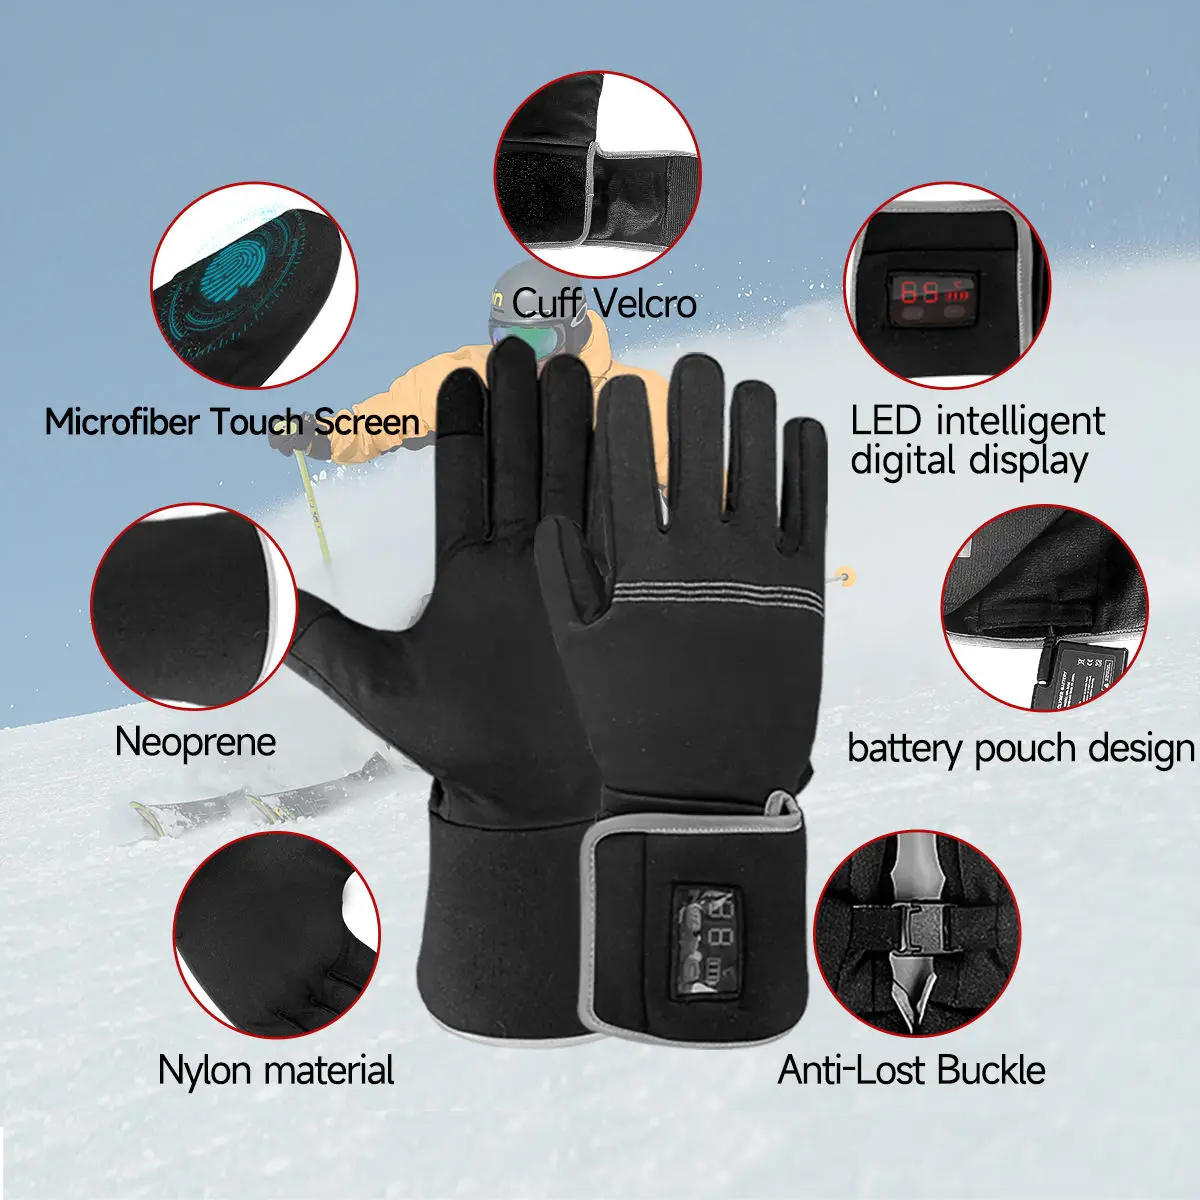 Rechargeable Battery Heated Gloves for Men, Heating Gloves, Thin Section, Ski, Hunting, Camping, Winter